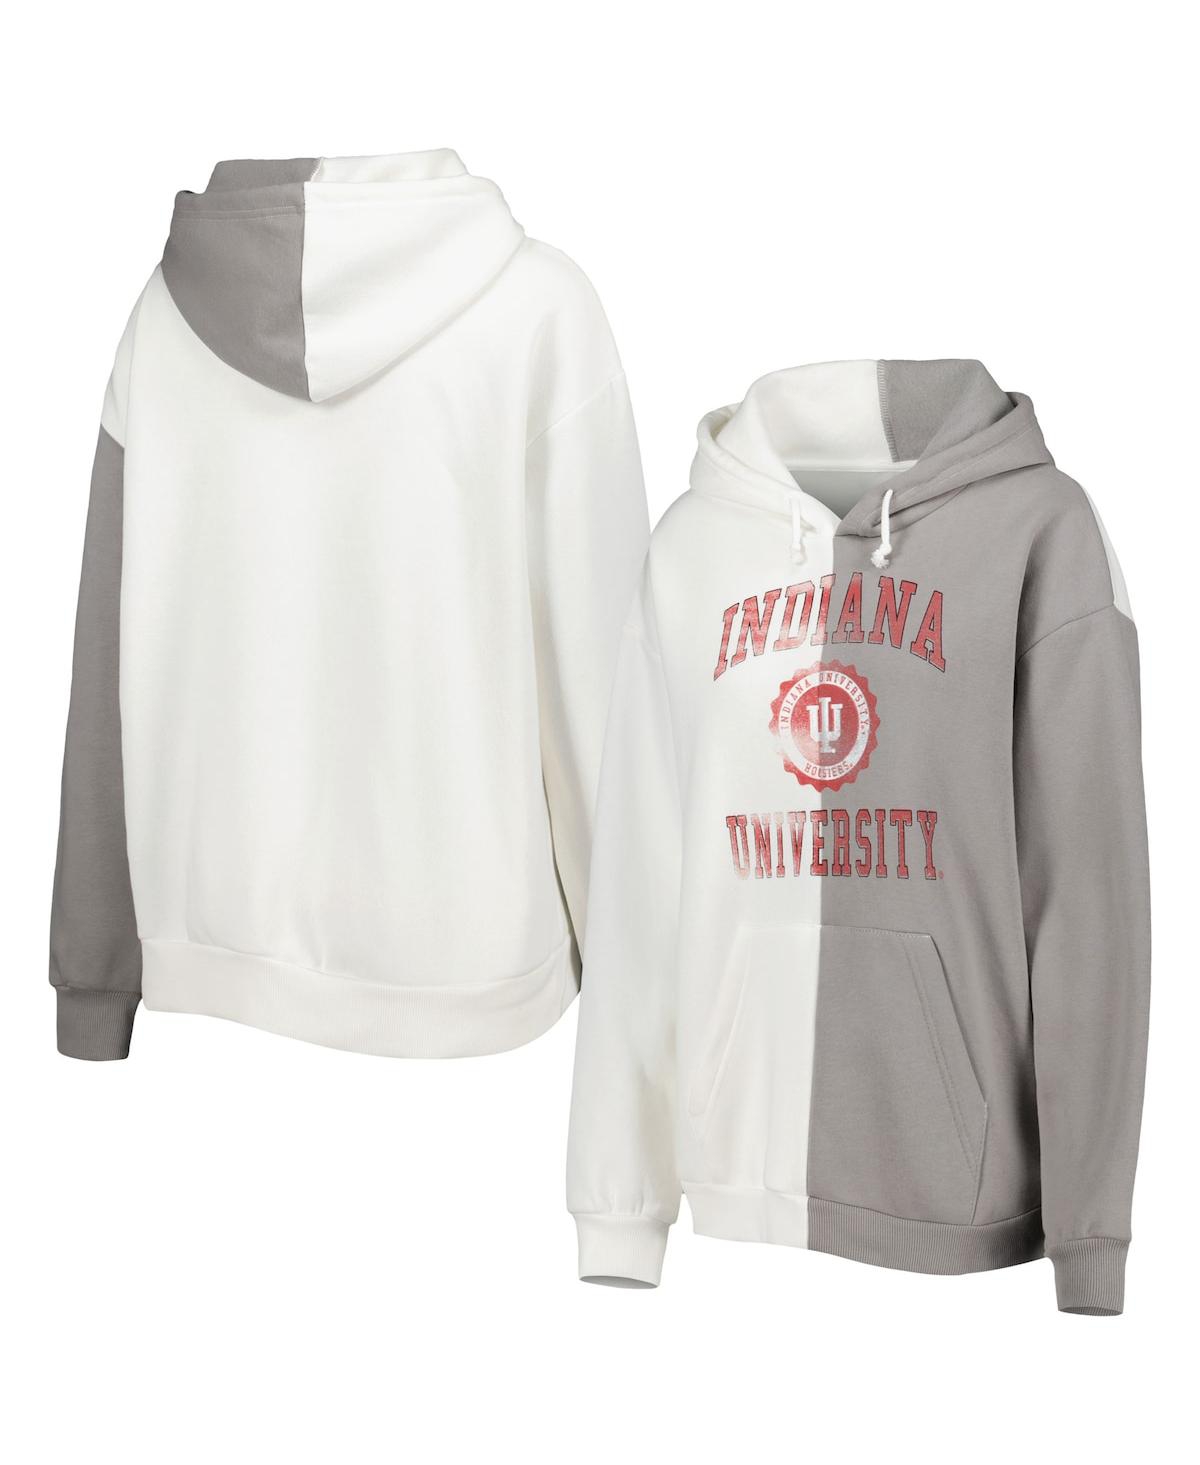 Gameday Couture Women's Gameday Couture Gray, White Indiana